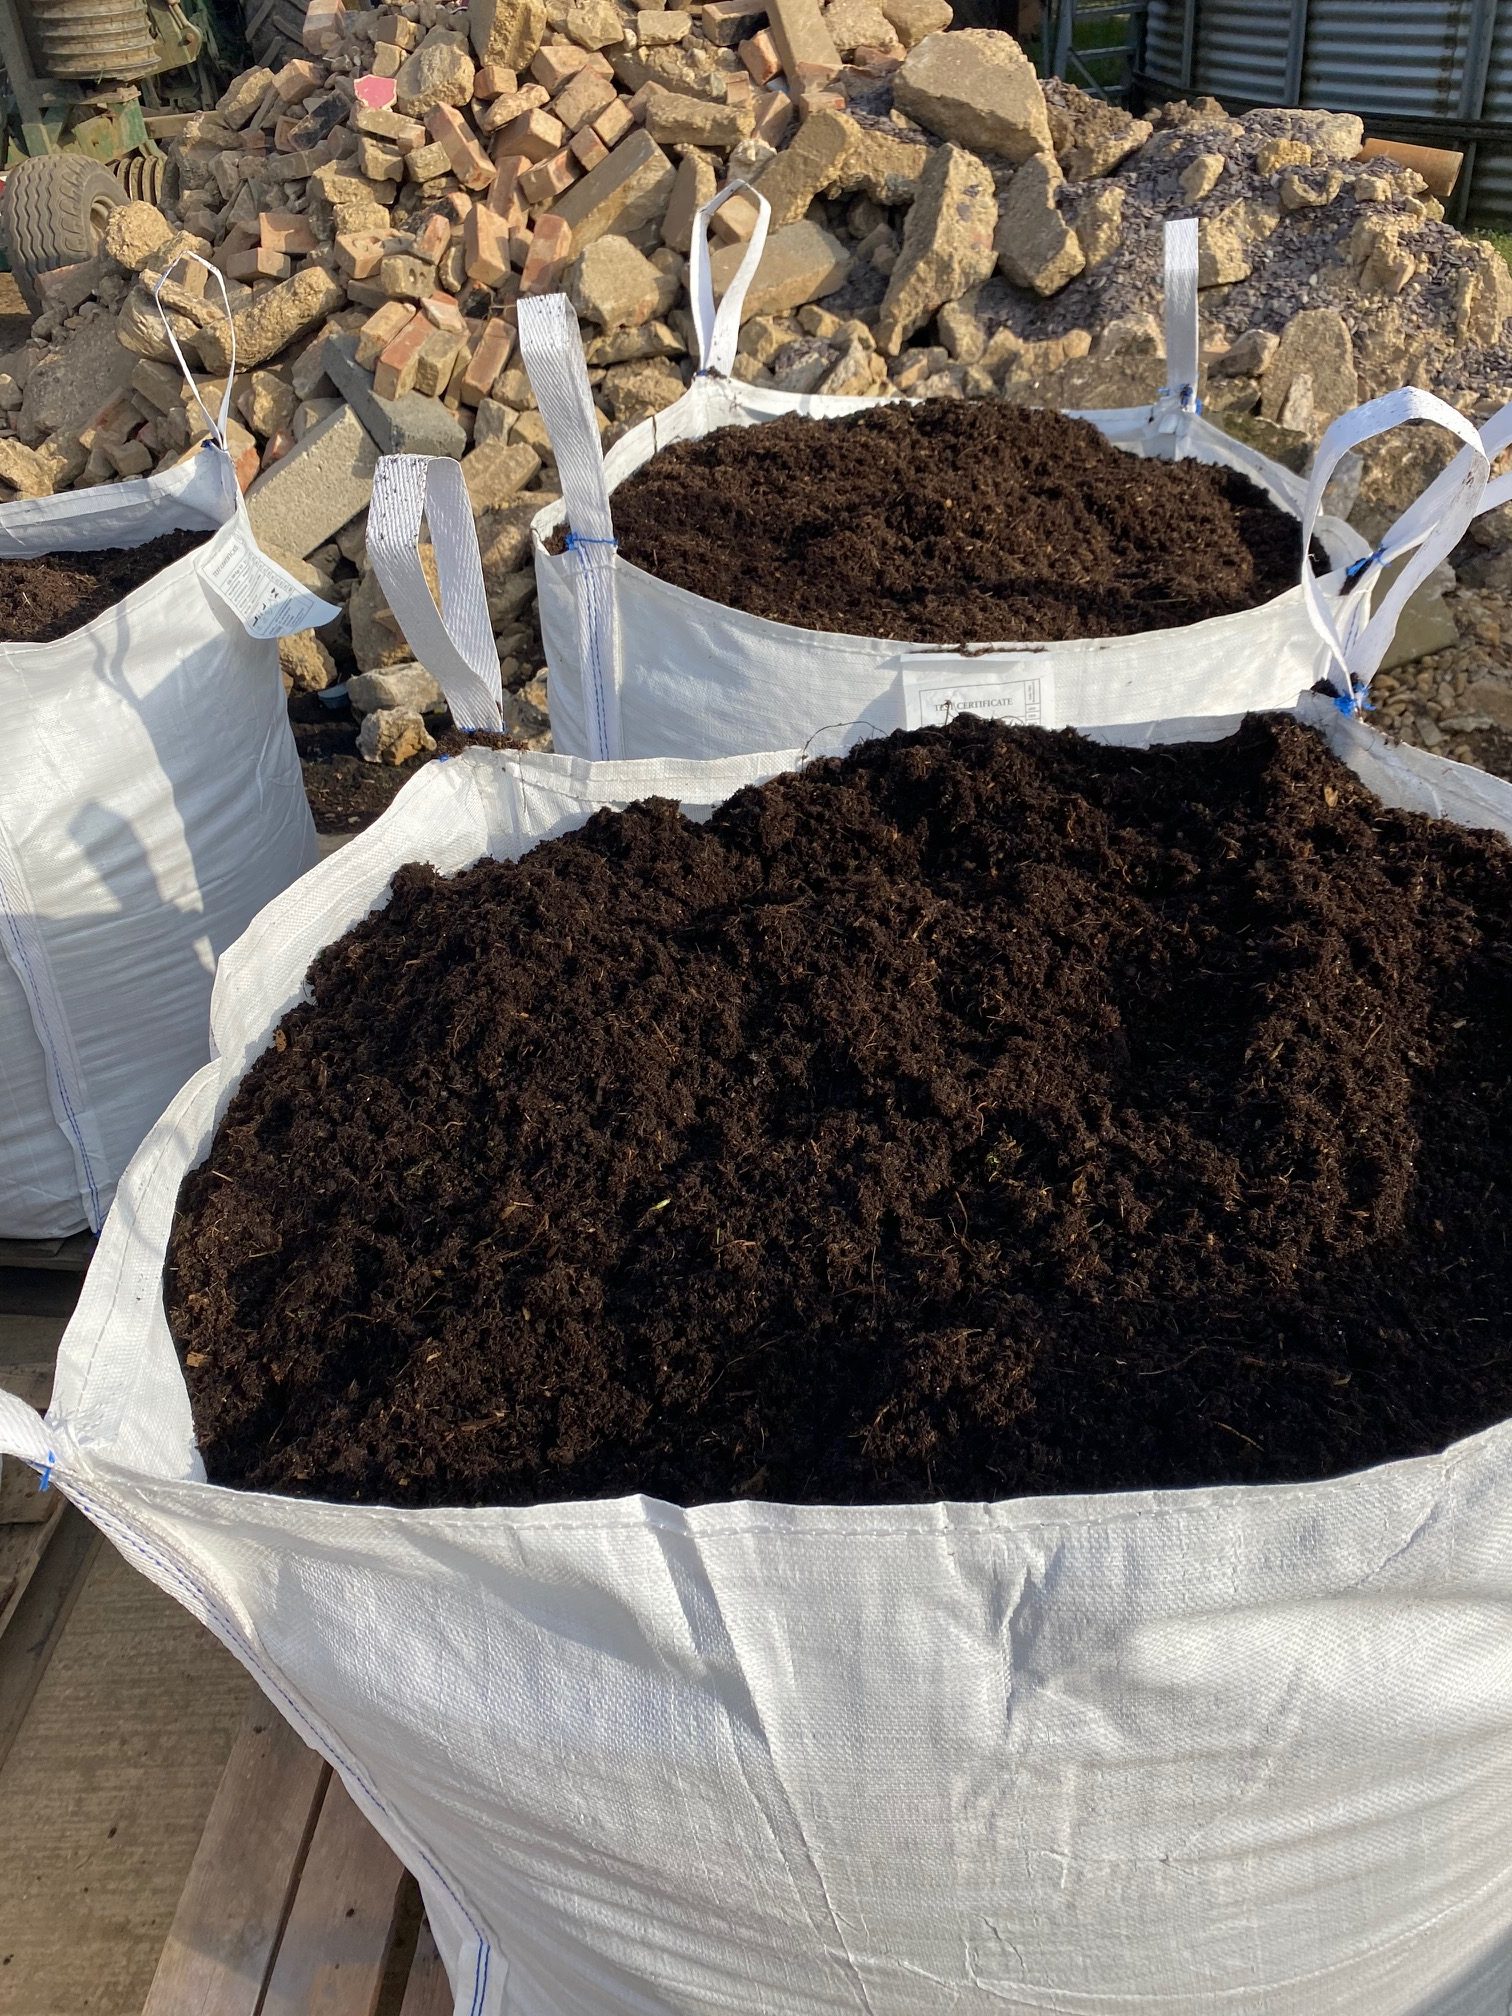 large 700 litre builders bag full of top quality organic compost